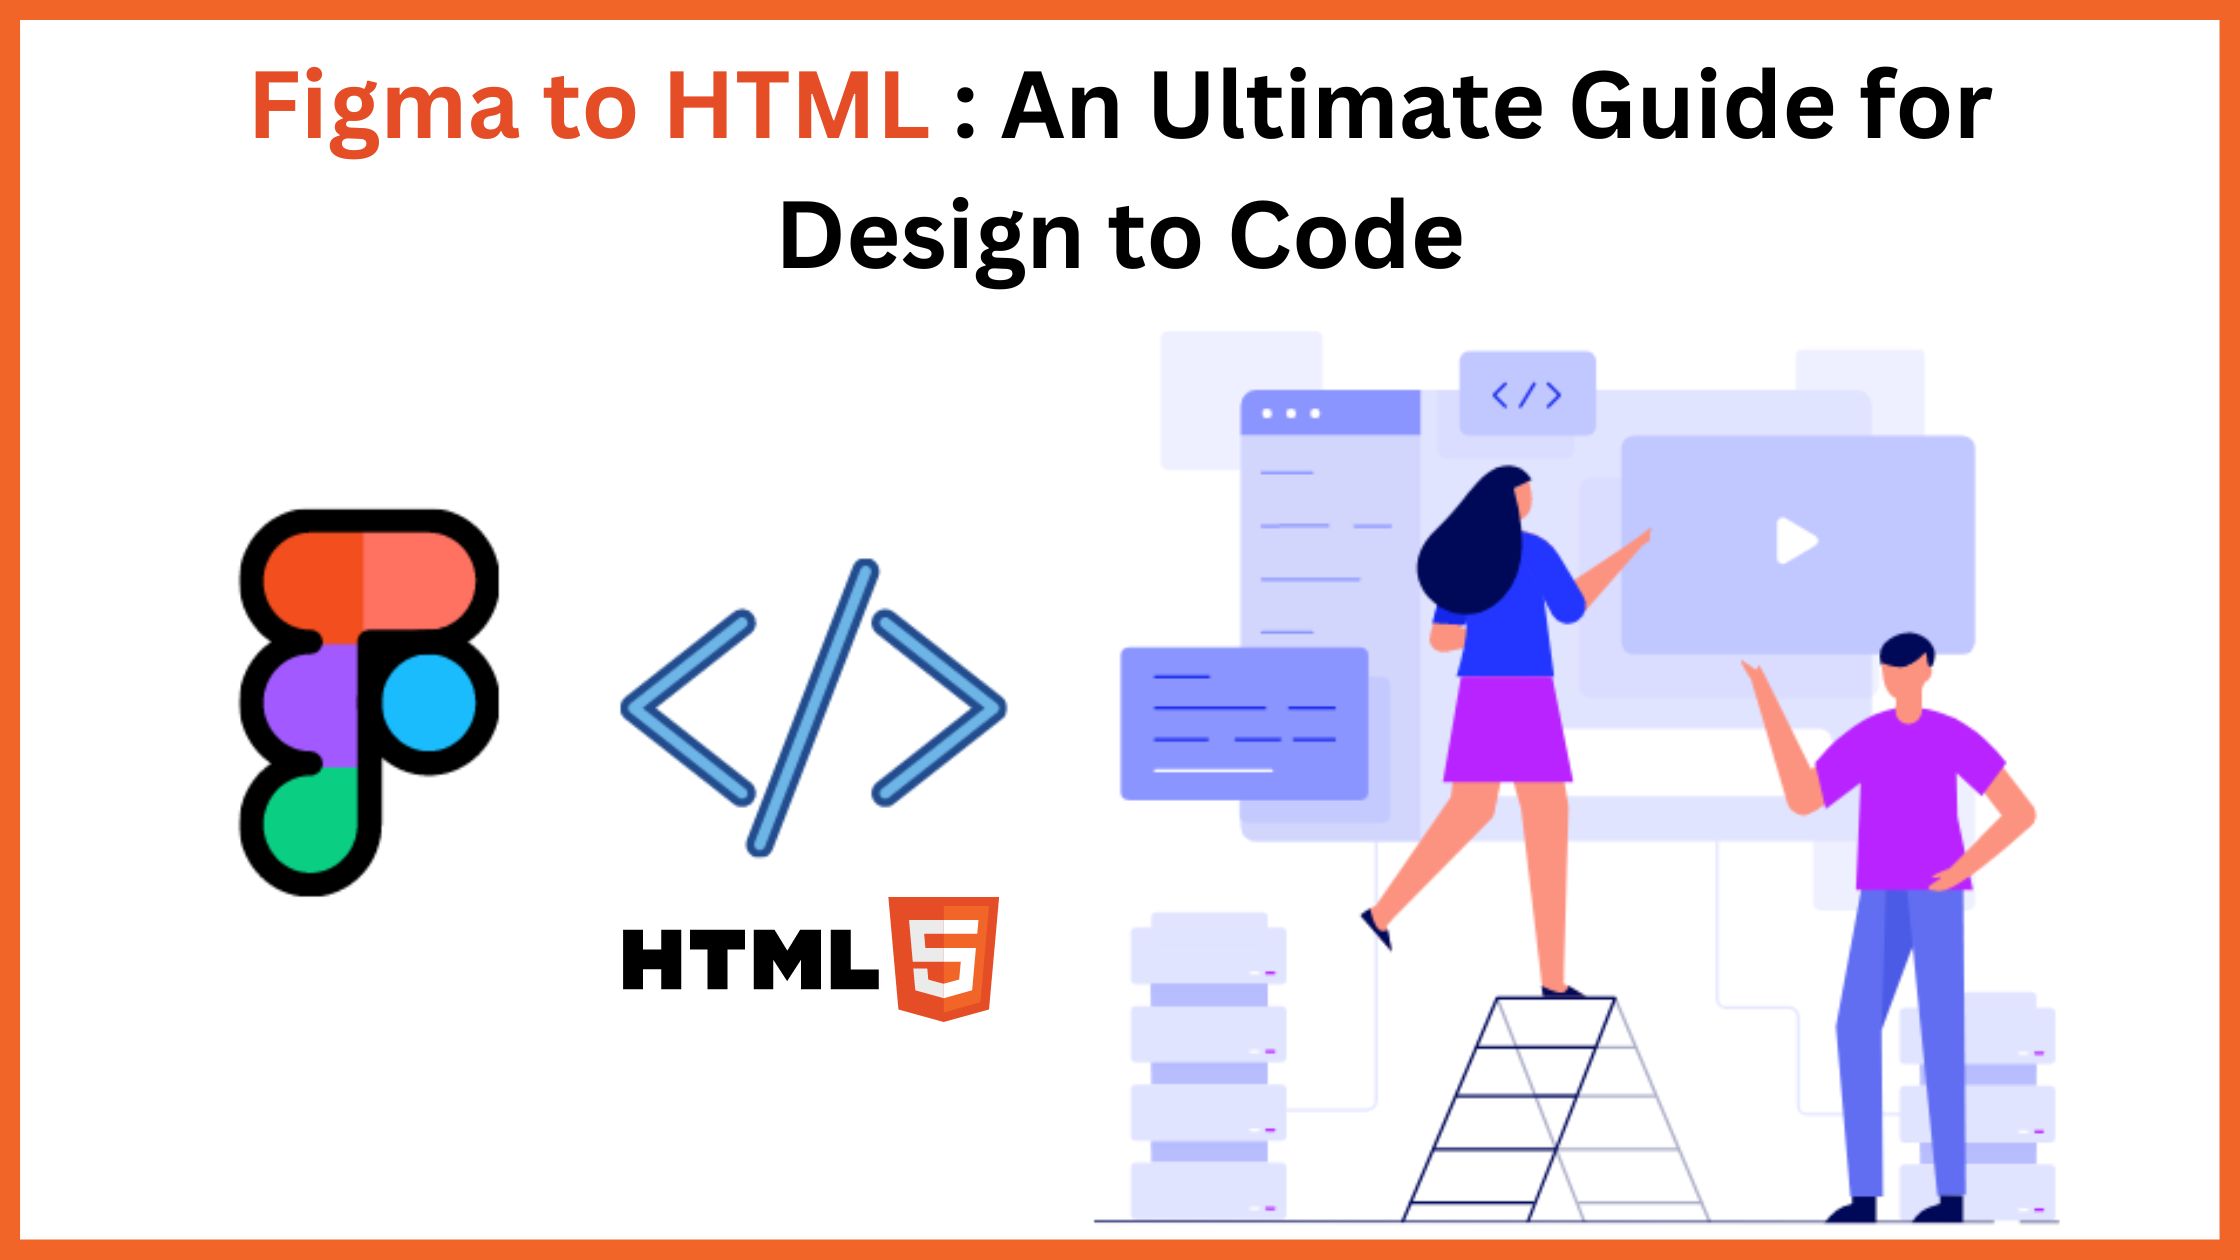 Figma to HTML An Ultimate Guide for Design to Code